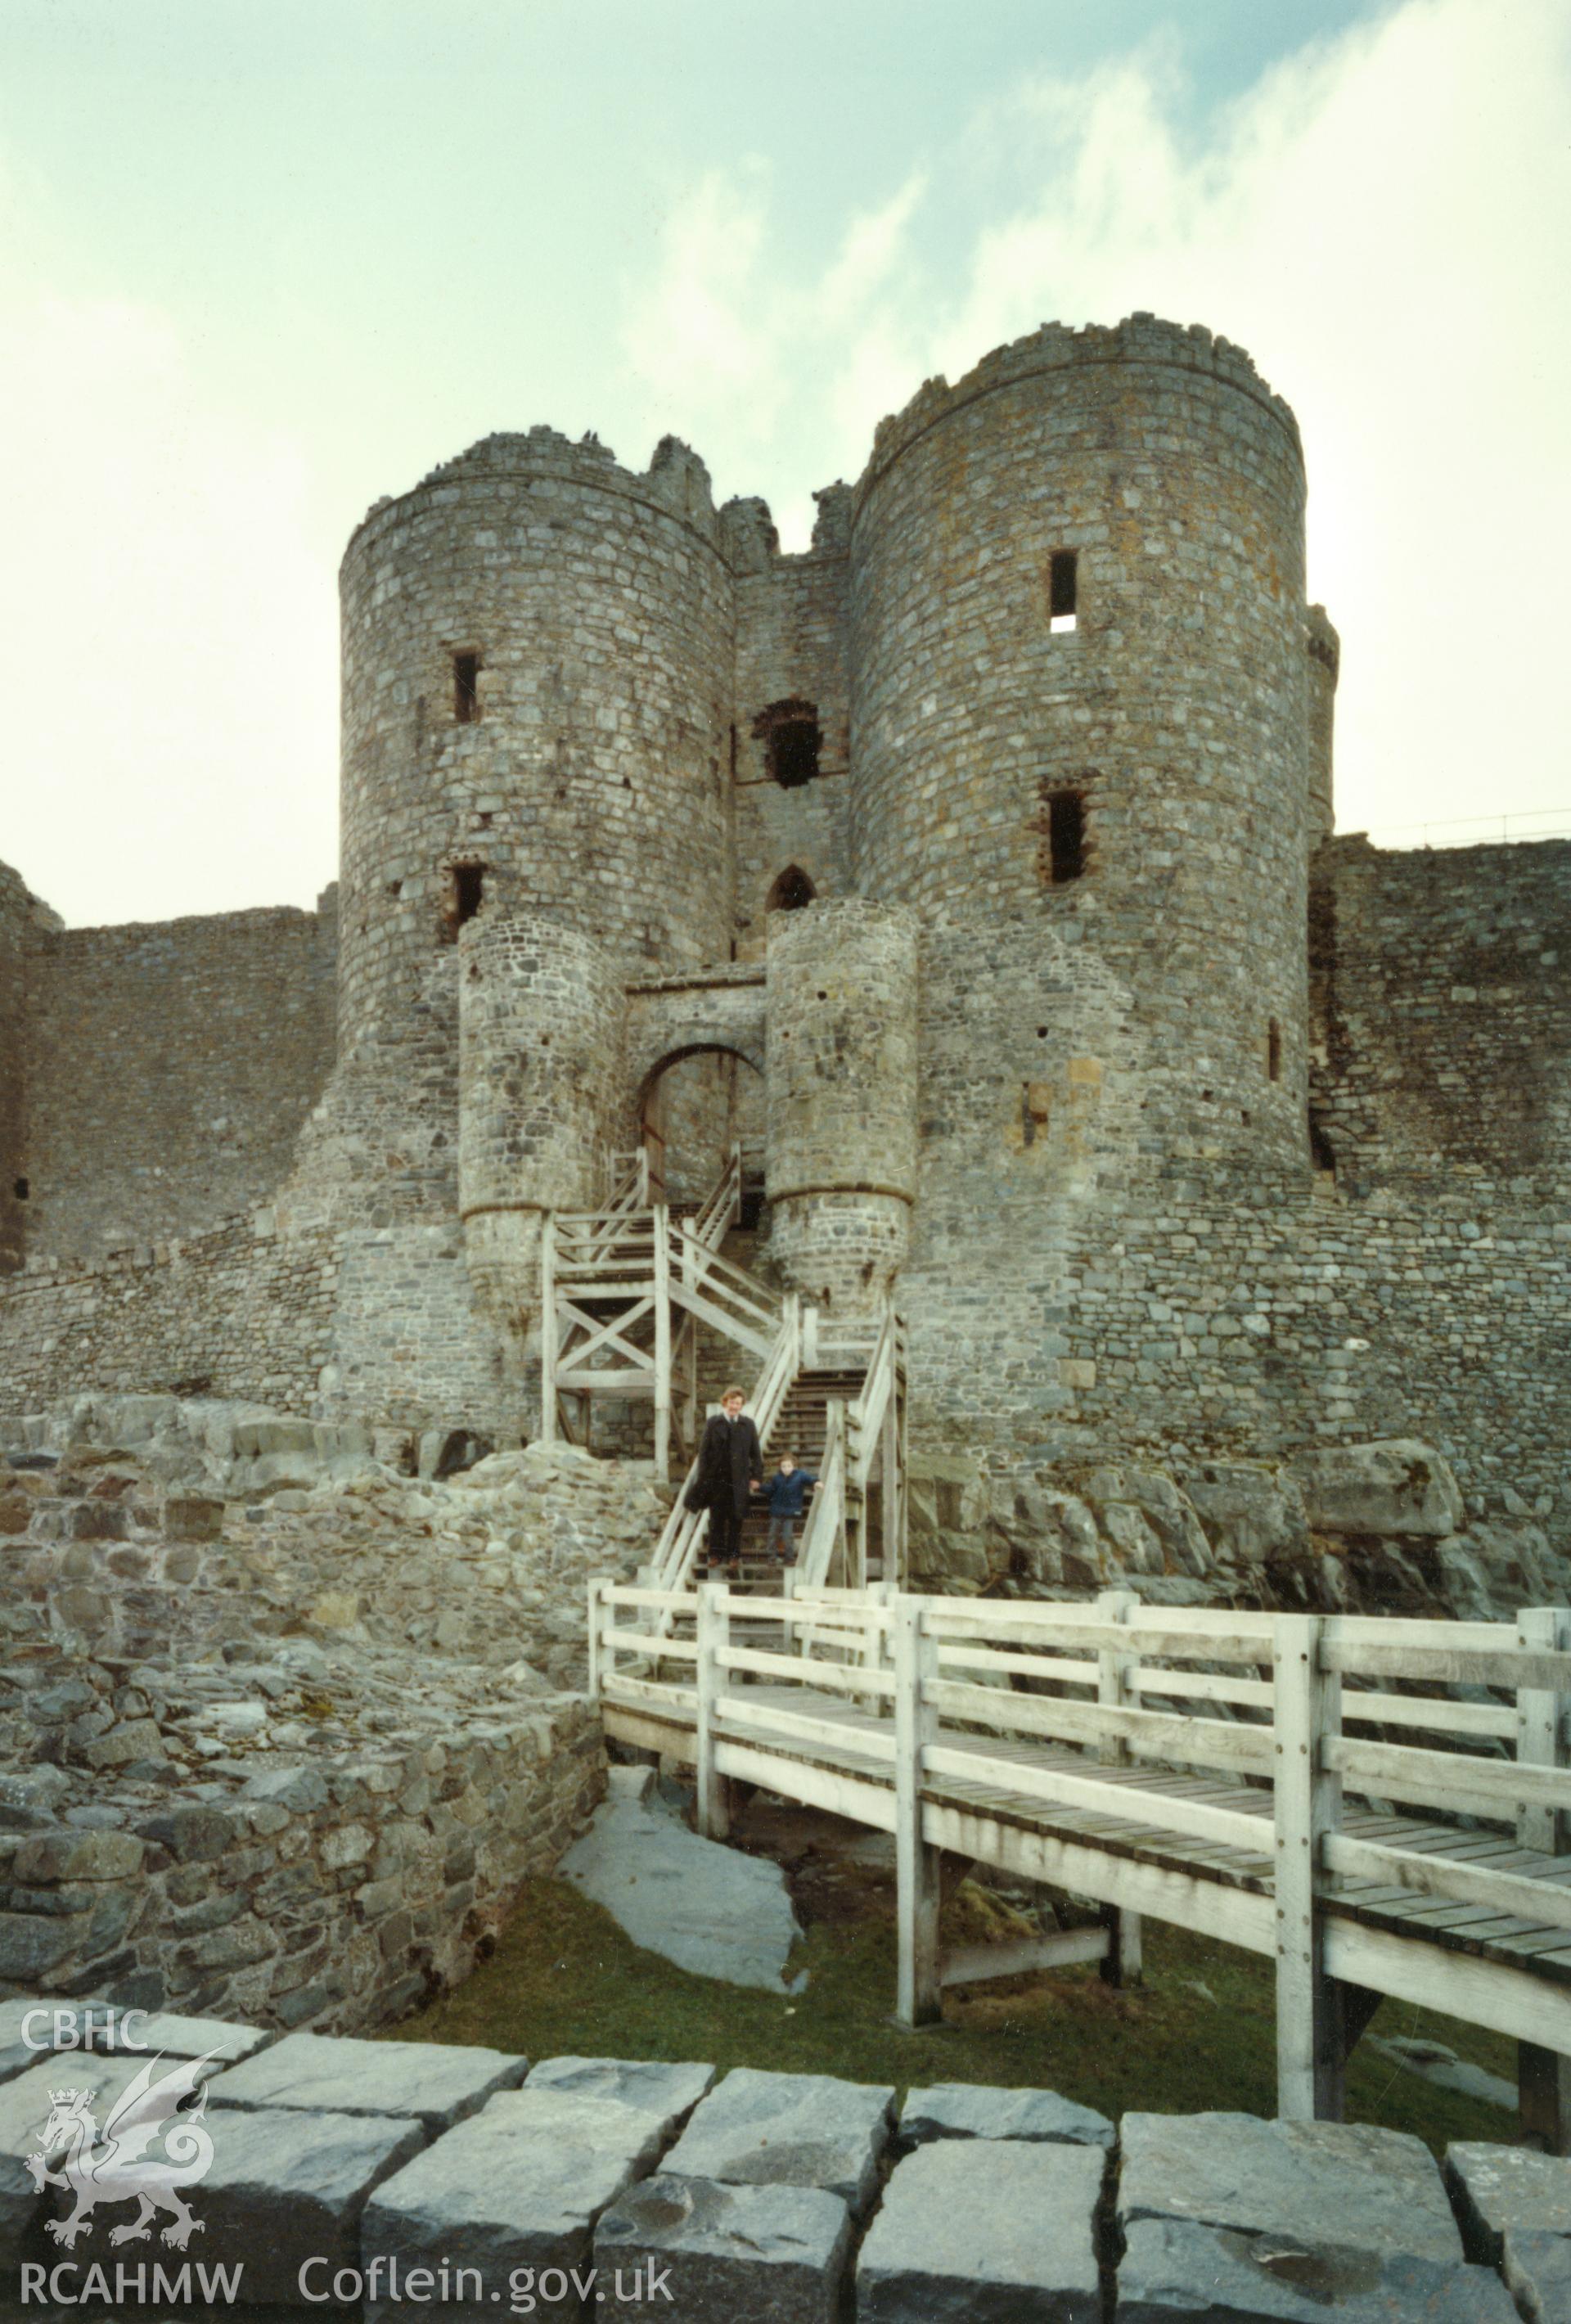 1 colour print showing view of Harlech castle, collated by the former Central Office of Information.